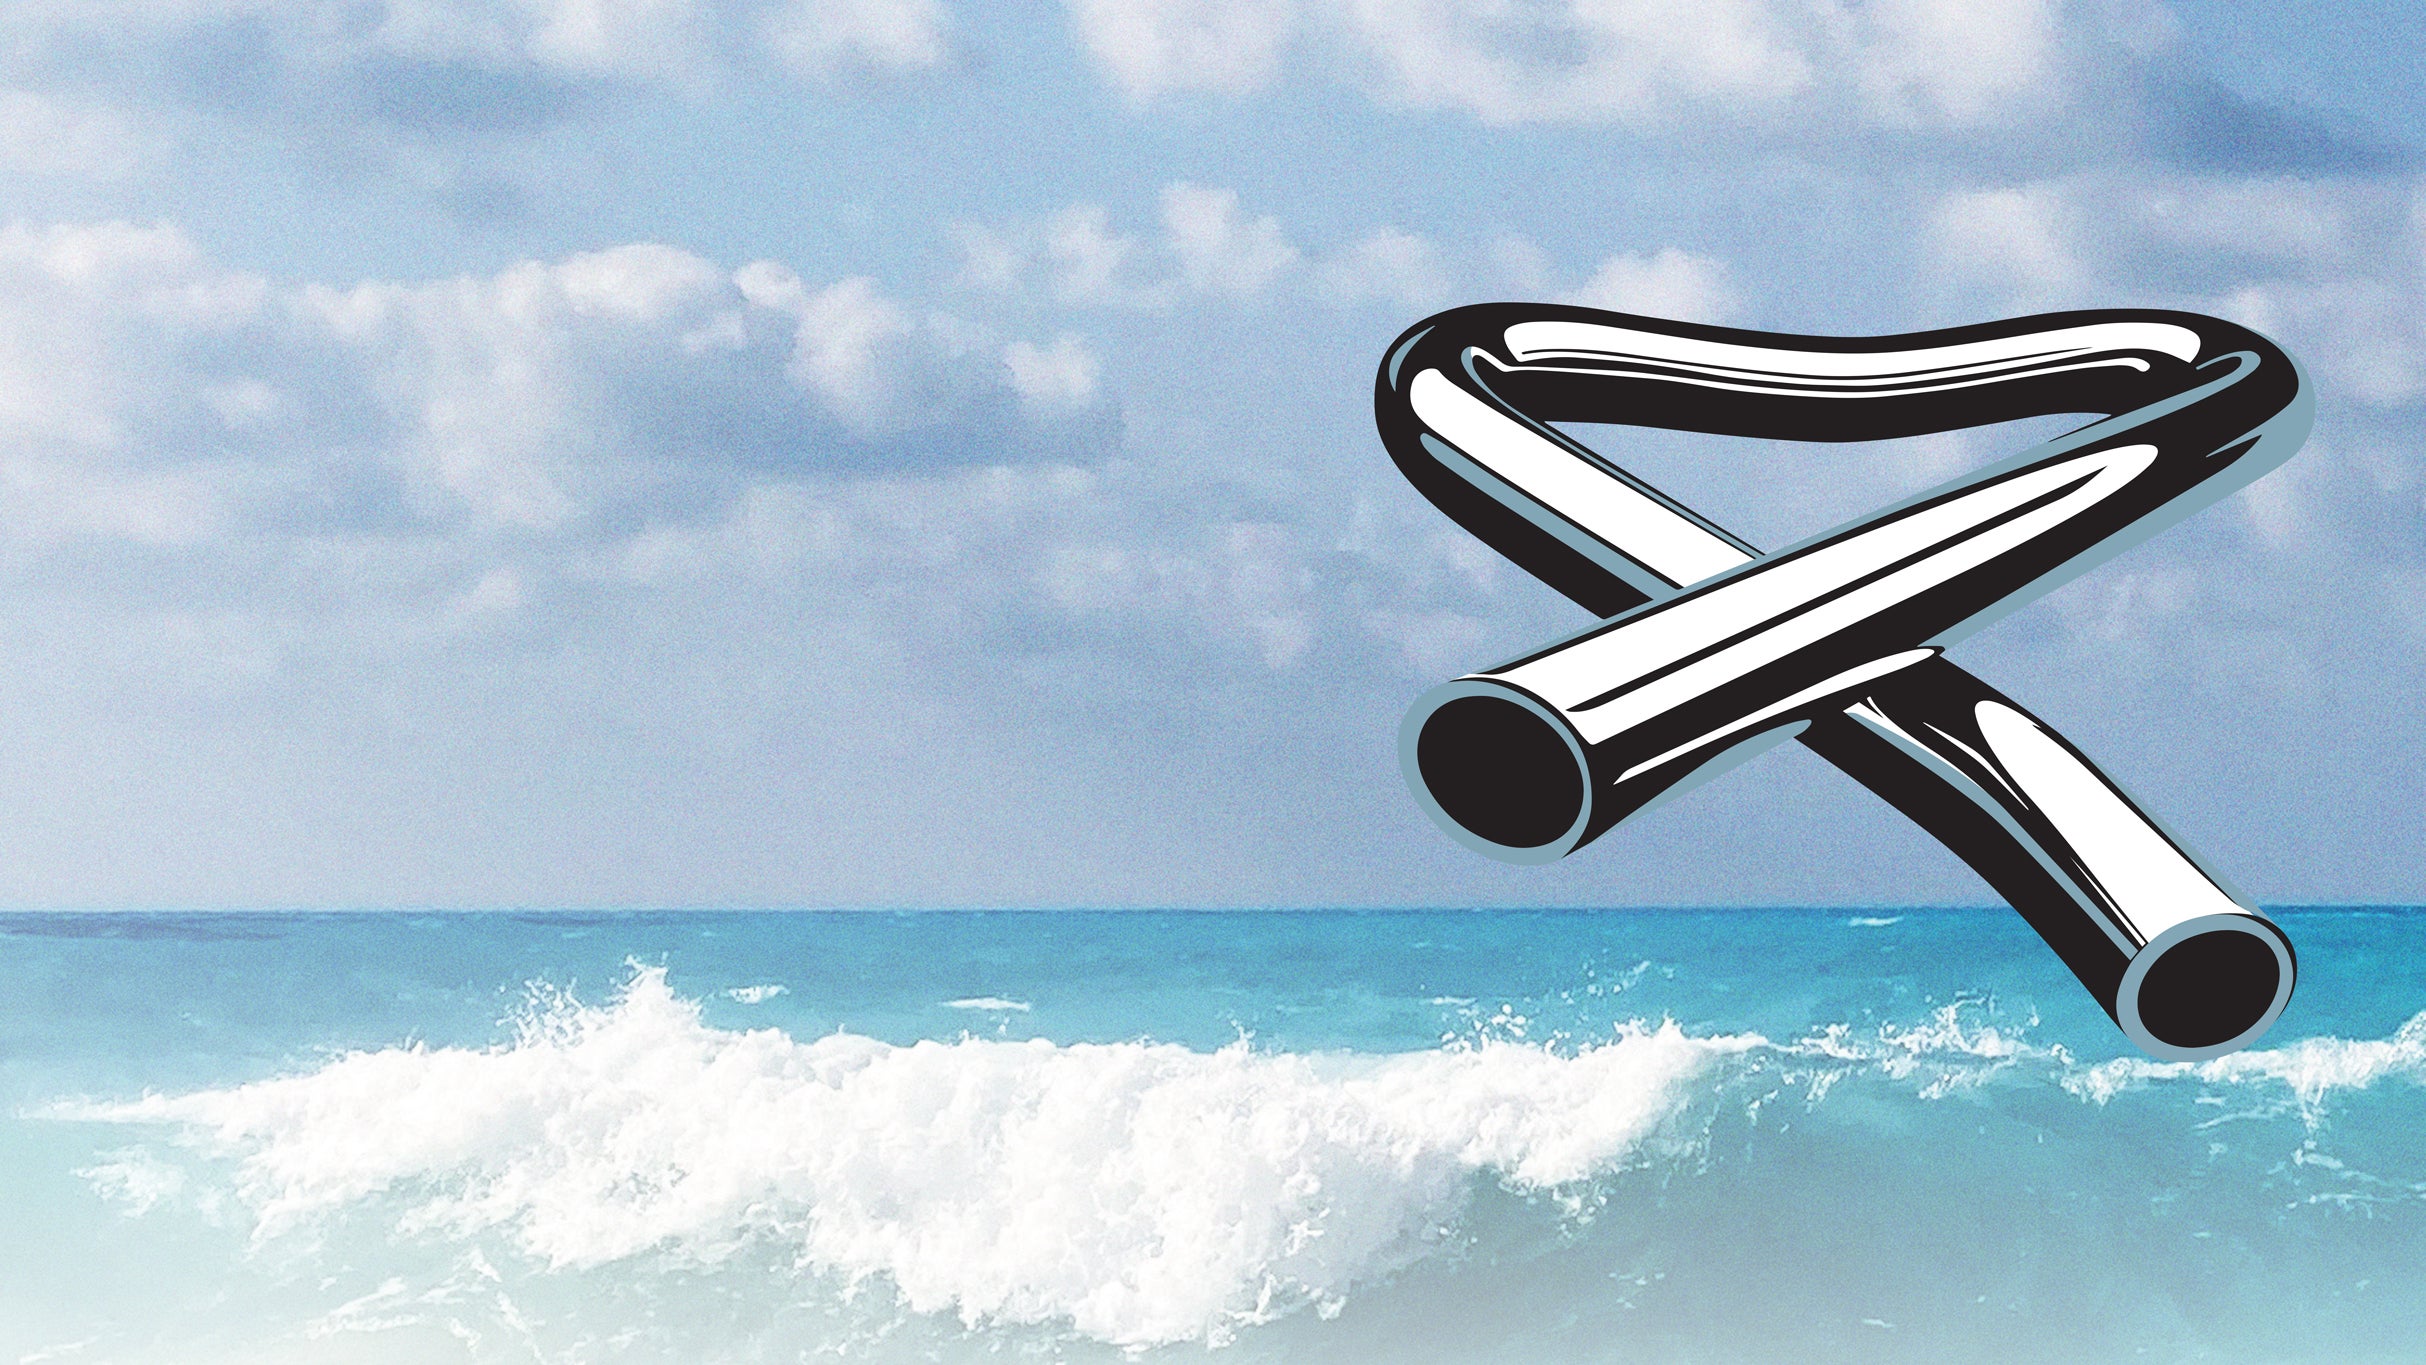 Mike Oldfield's Tubular Bells Live in Concert in Takapuna Beach promo photo for Promoter presale offer code